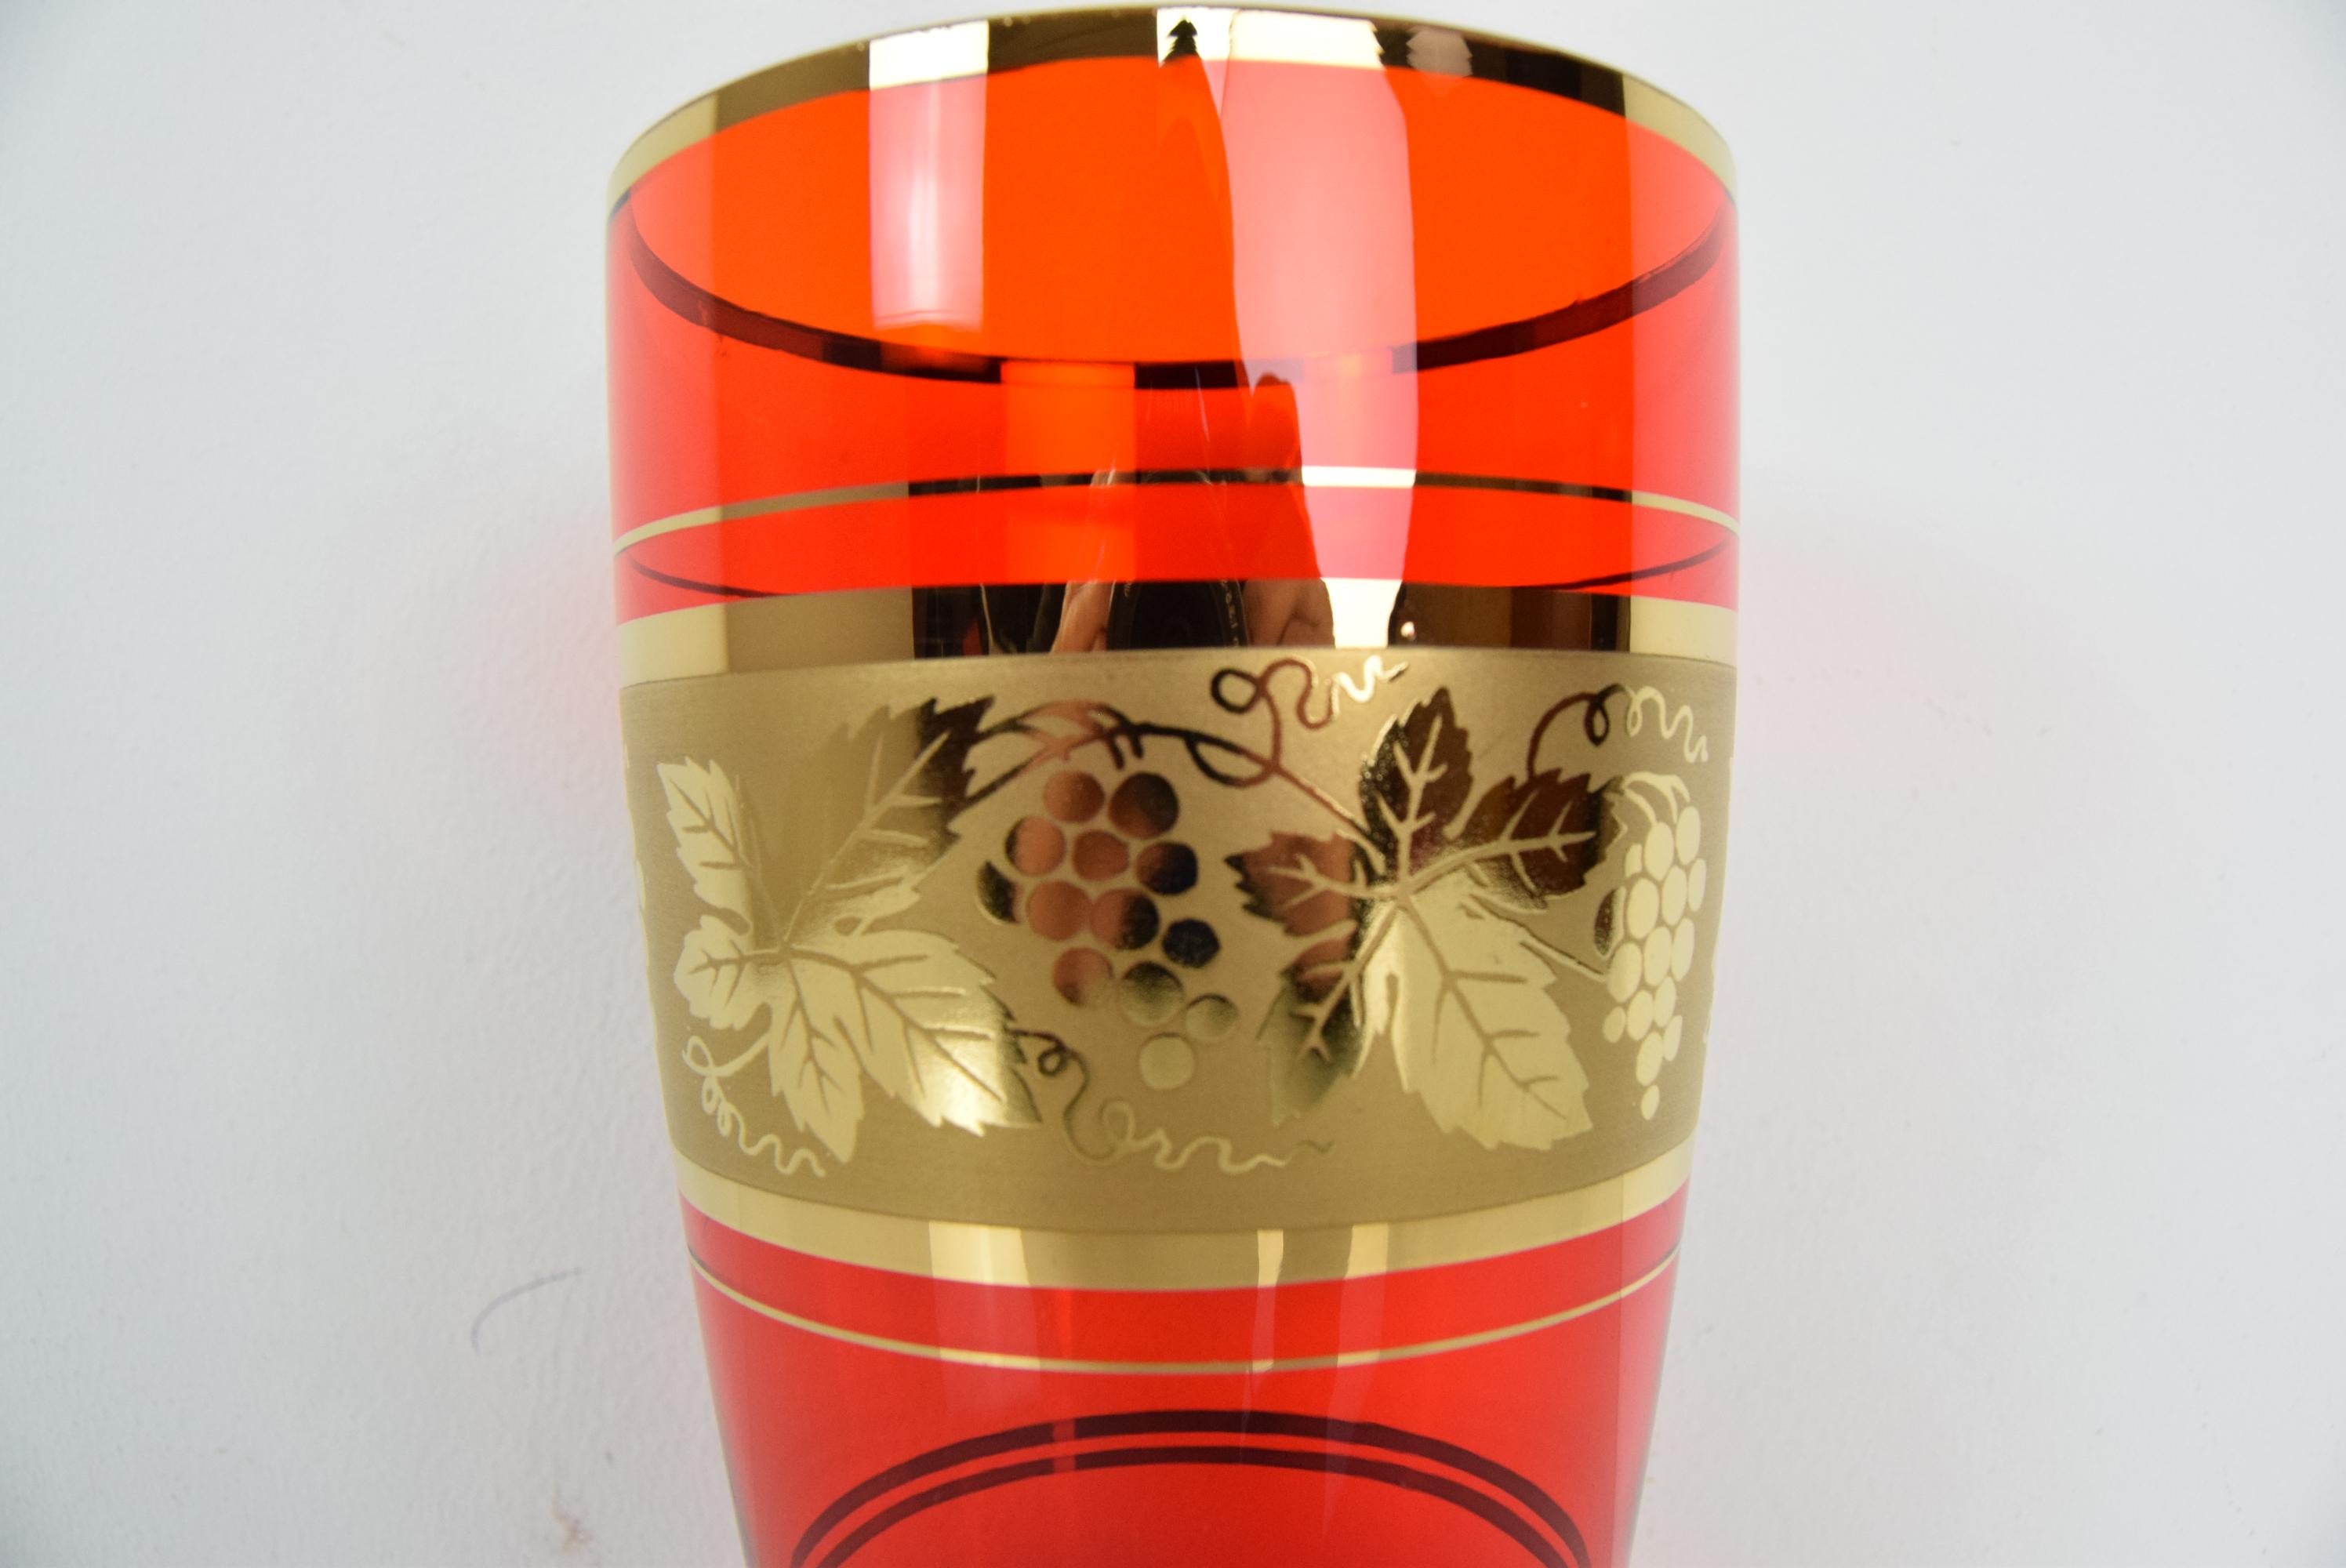 Czech Ruby Glass Vase with Gold Ornament by Jan Gabrhel, 1960s